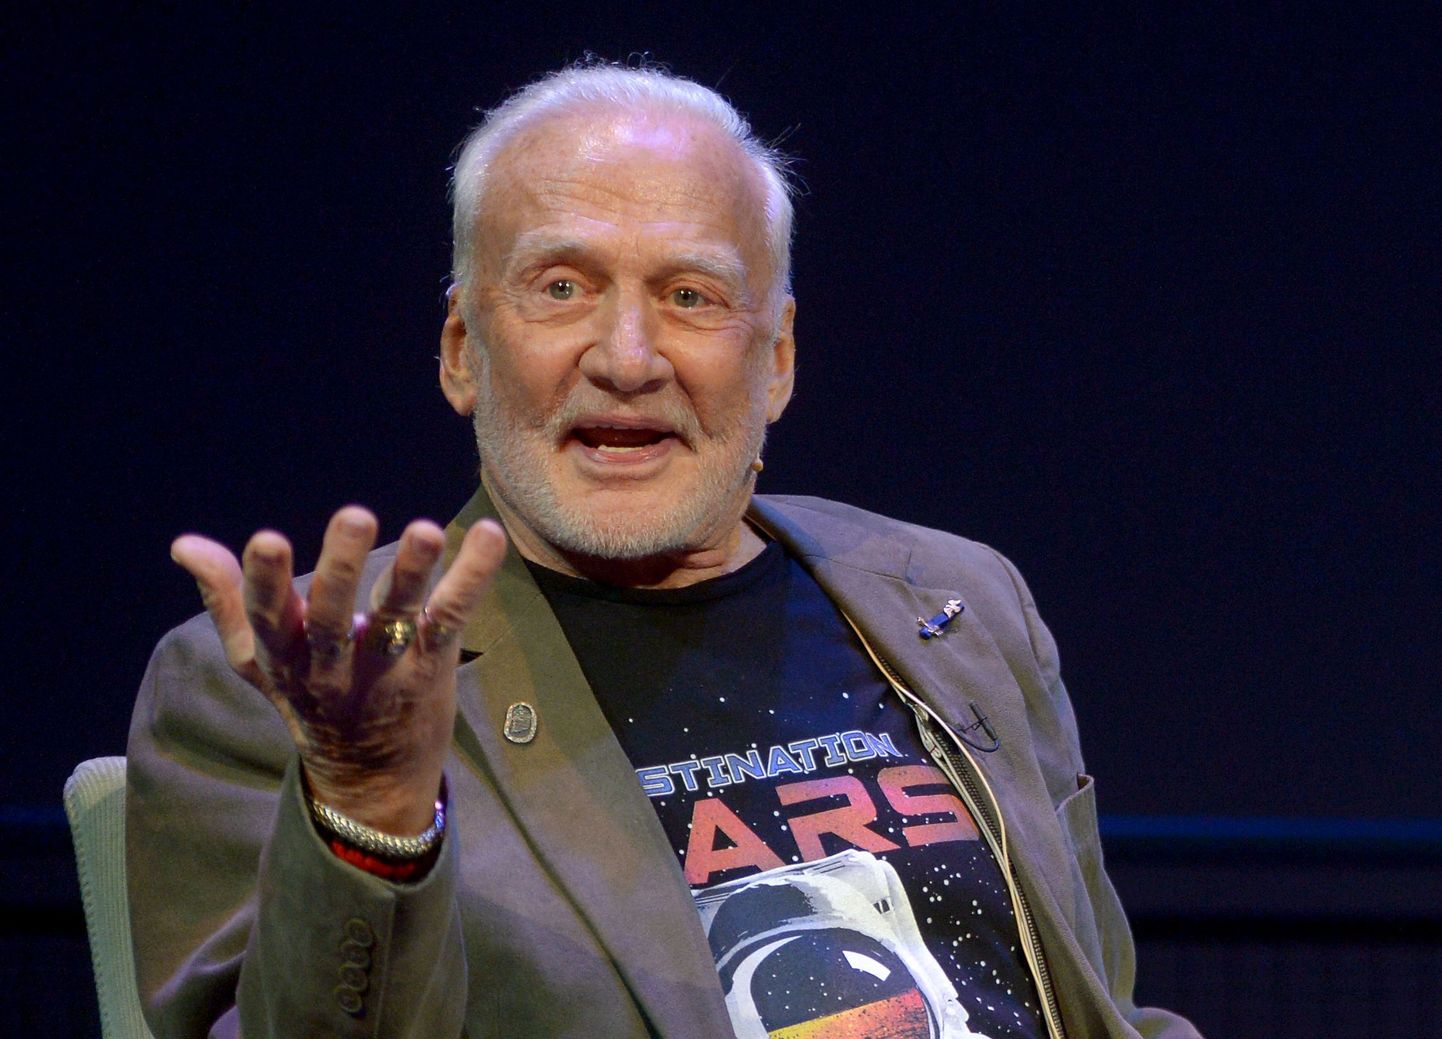 Edwin Buzz Aldrin on stage at the Science Museum, London.